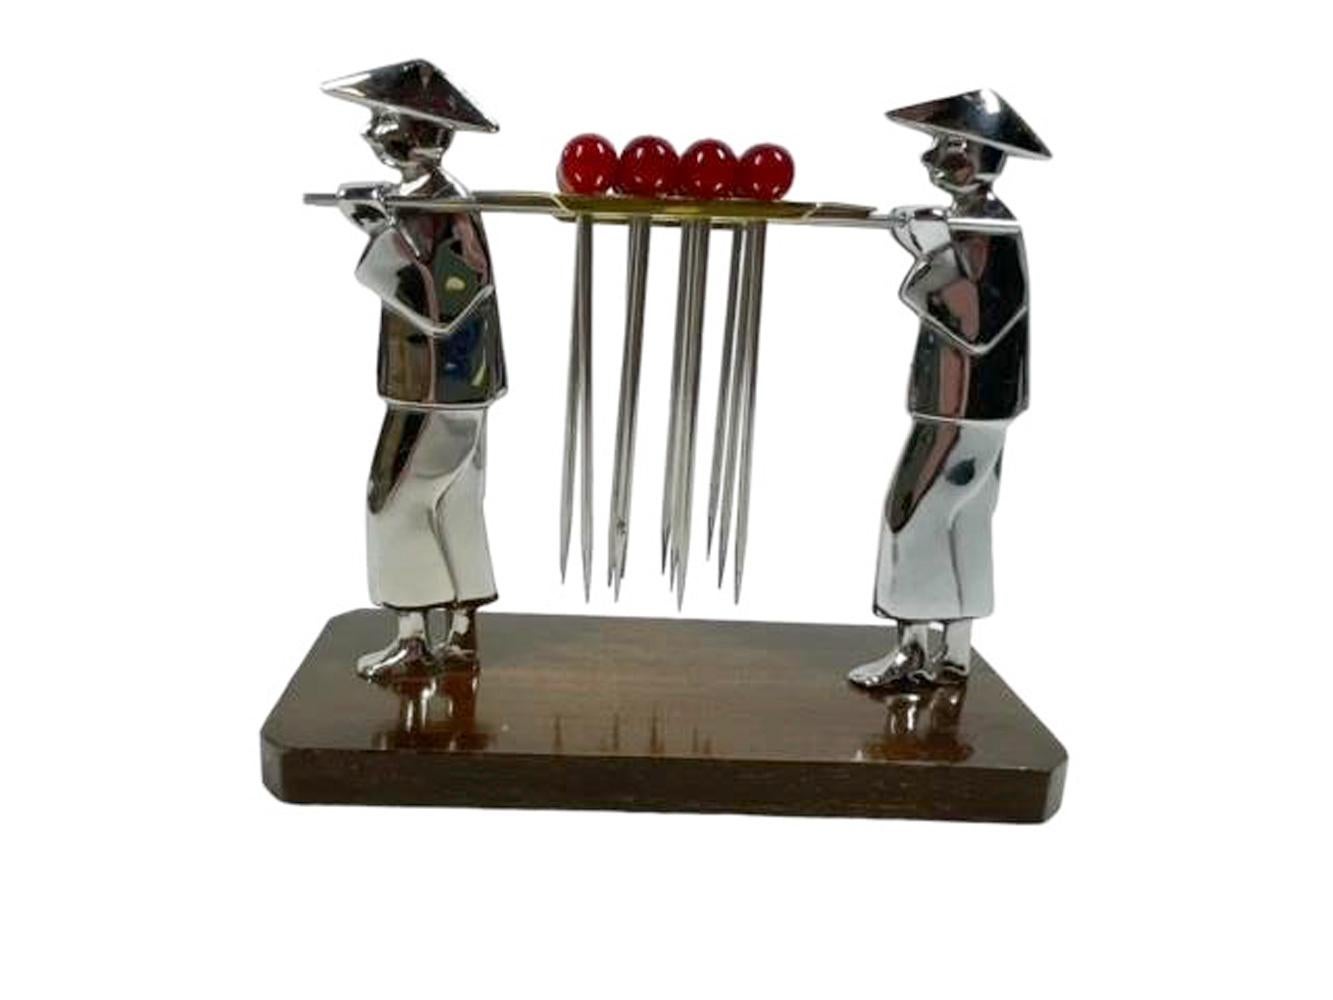 Set of 12 cocktail picks with red Bakelite ball tops and forked picks resting on a gold-tone pallet carried by poles on the shoulders of two chrome finished men standing on a wood base.